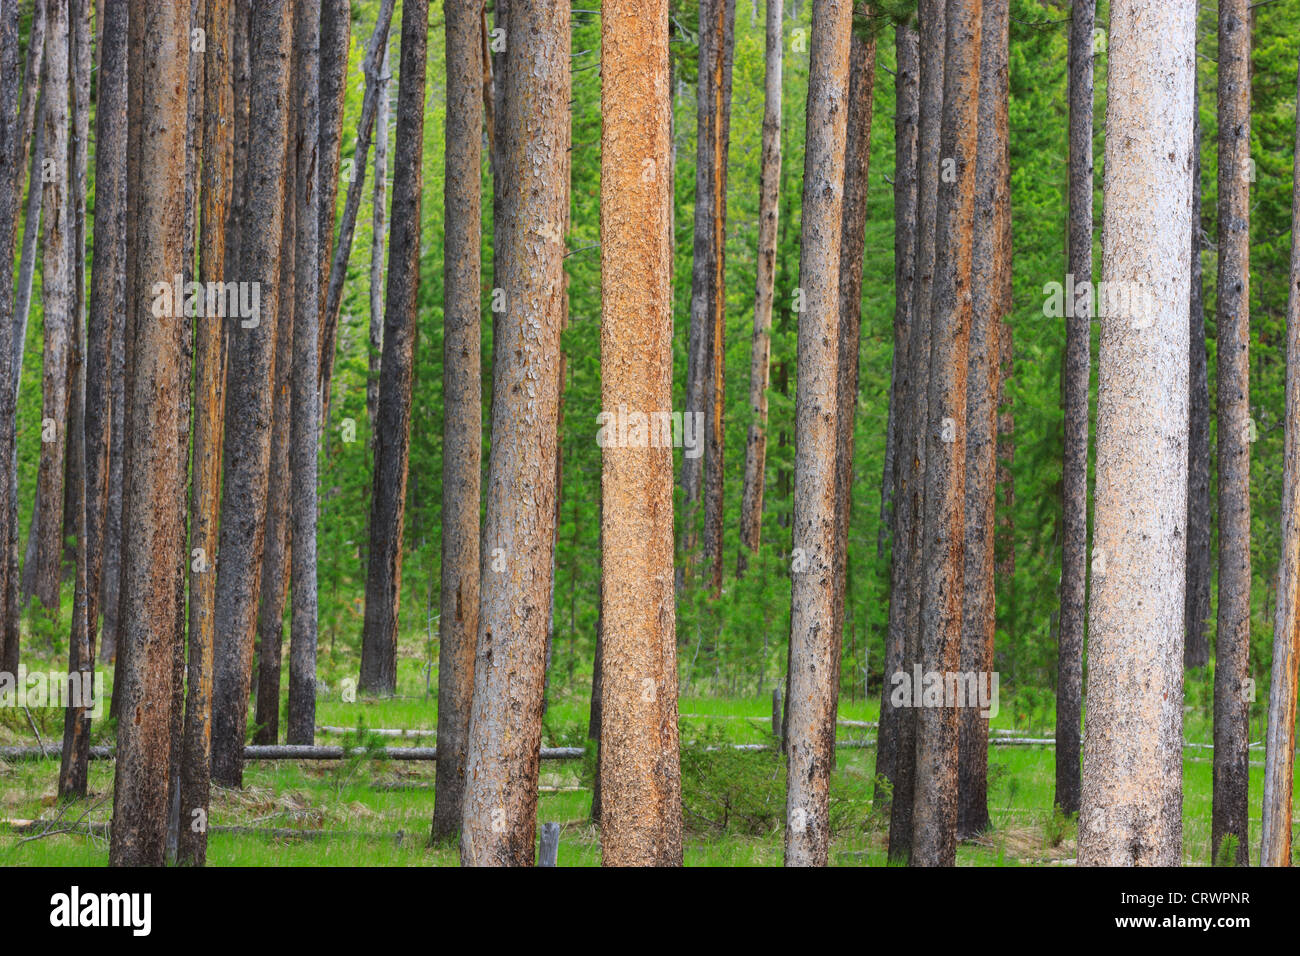 Lodgepole Pine Forest nel Parco Nazionale di Yellowstone, Wyoming USA Foto Stock